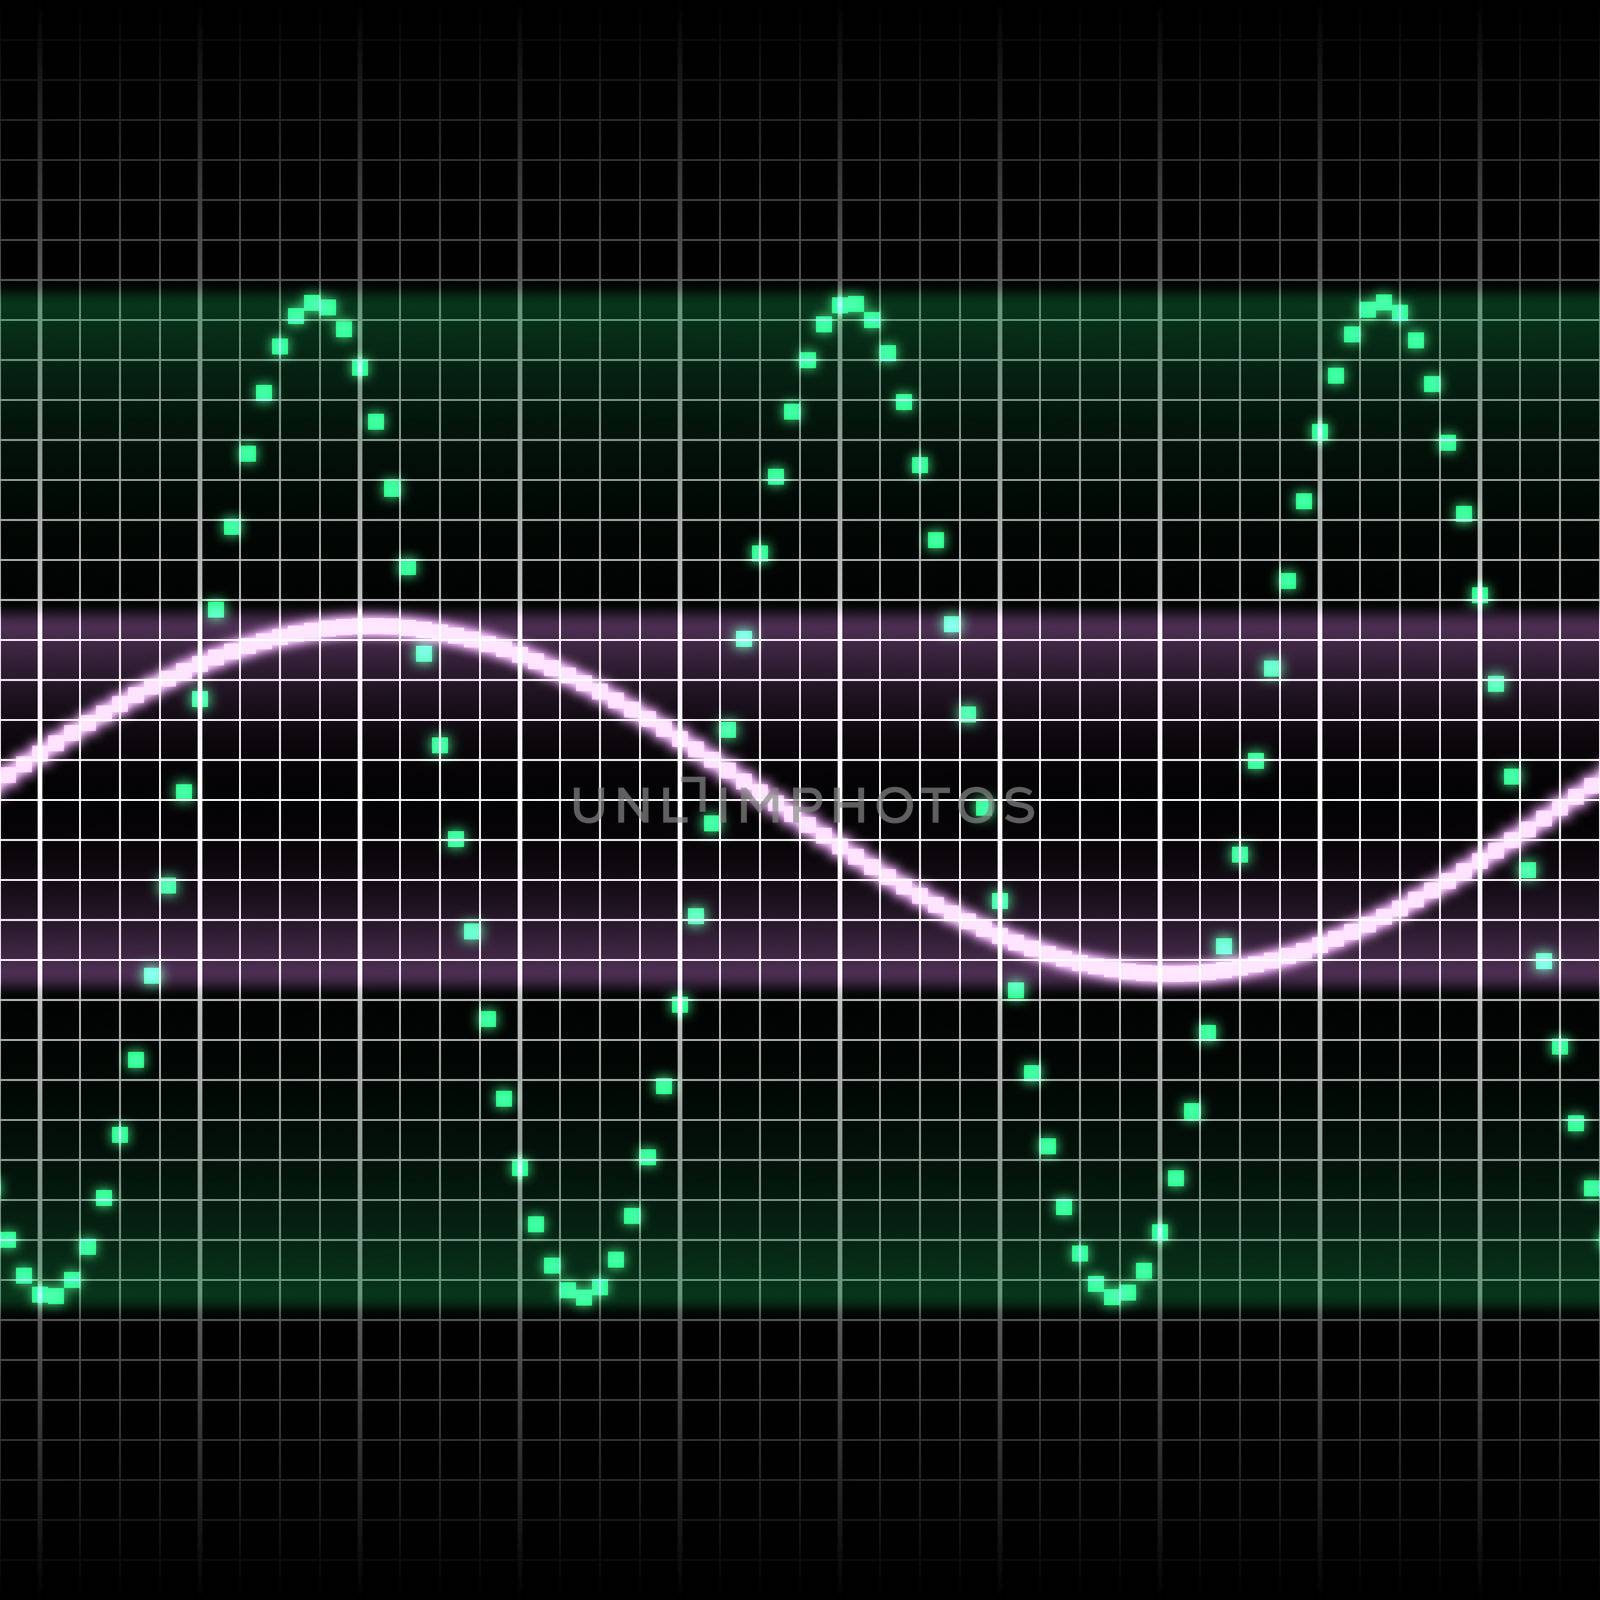 digitally created sound wave pattern, seamlessly tillable